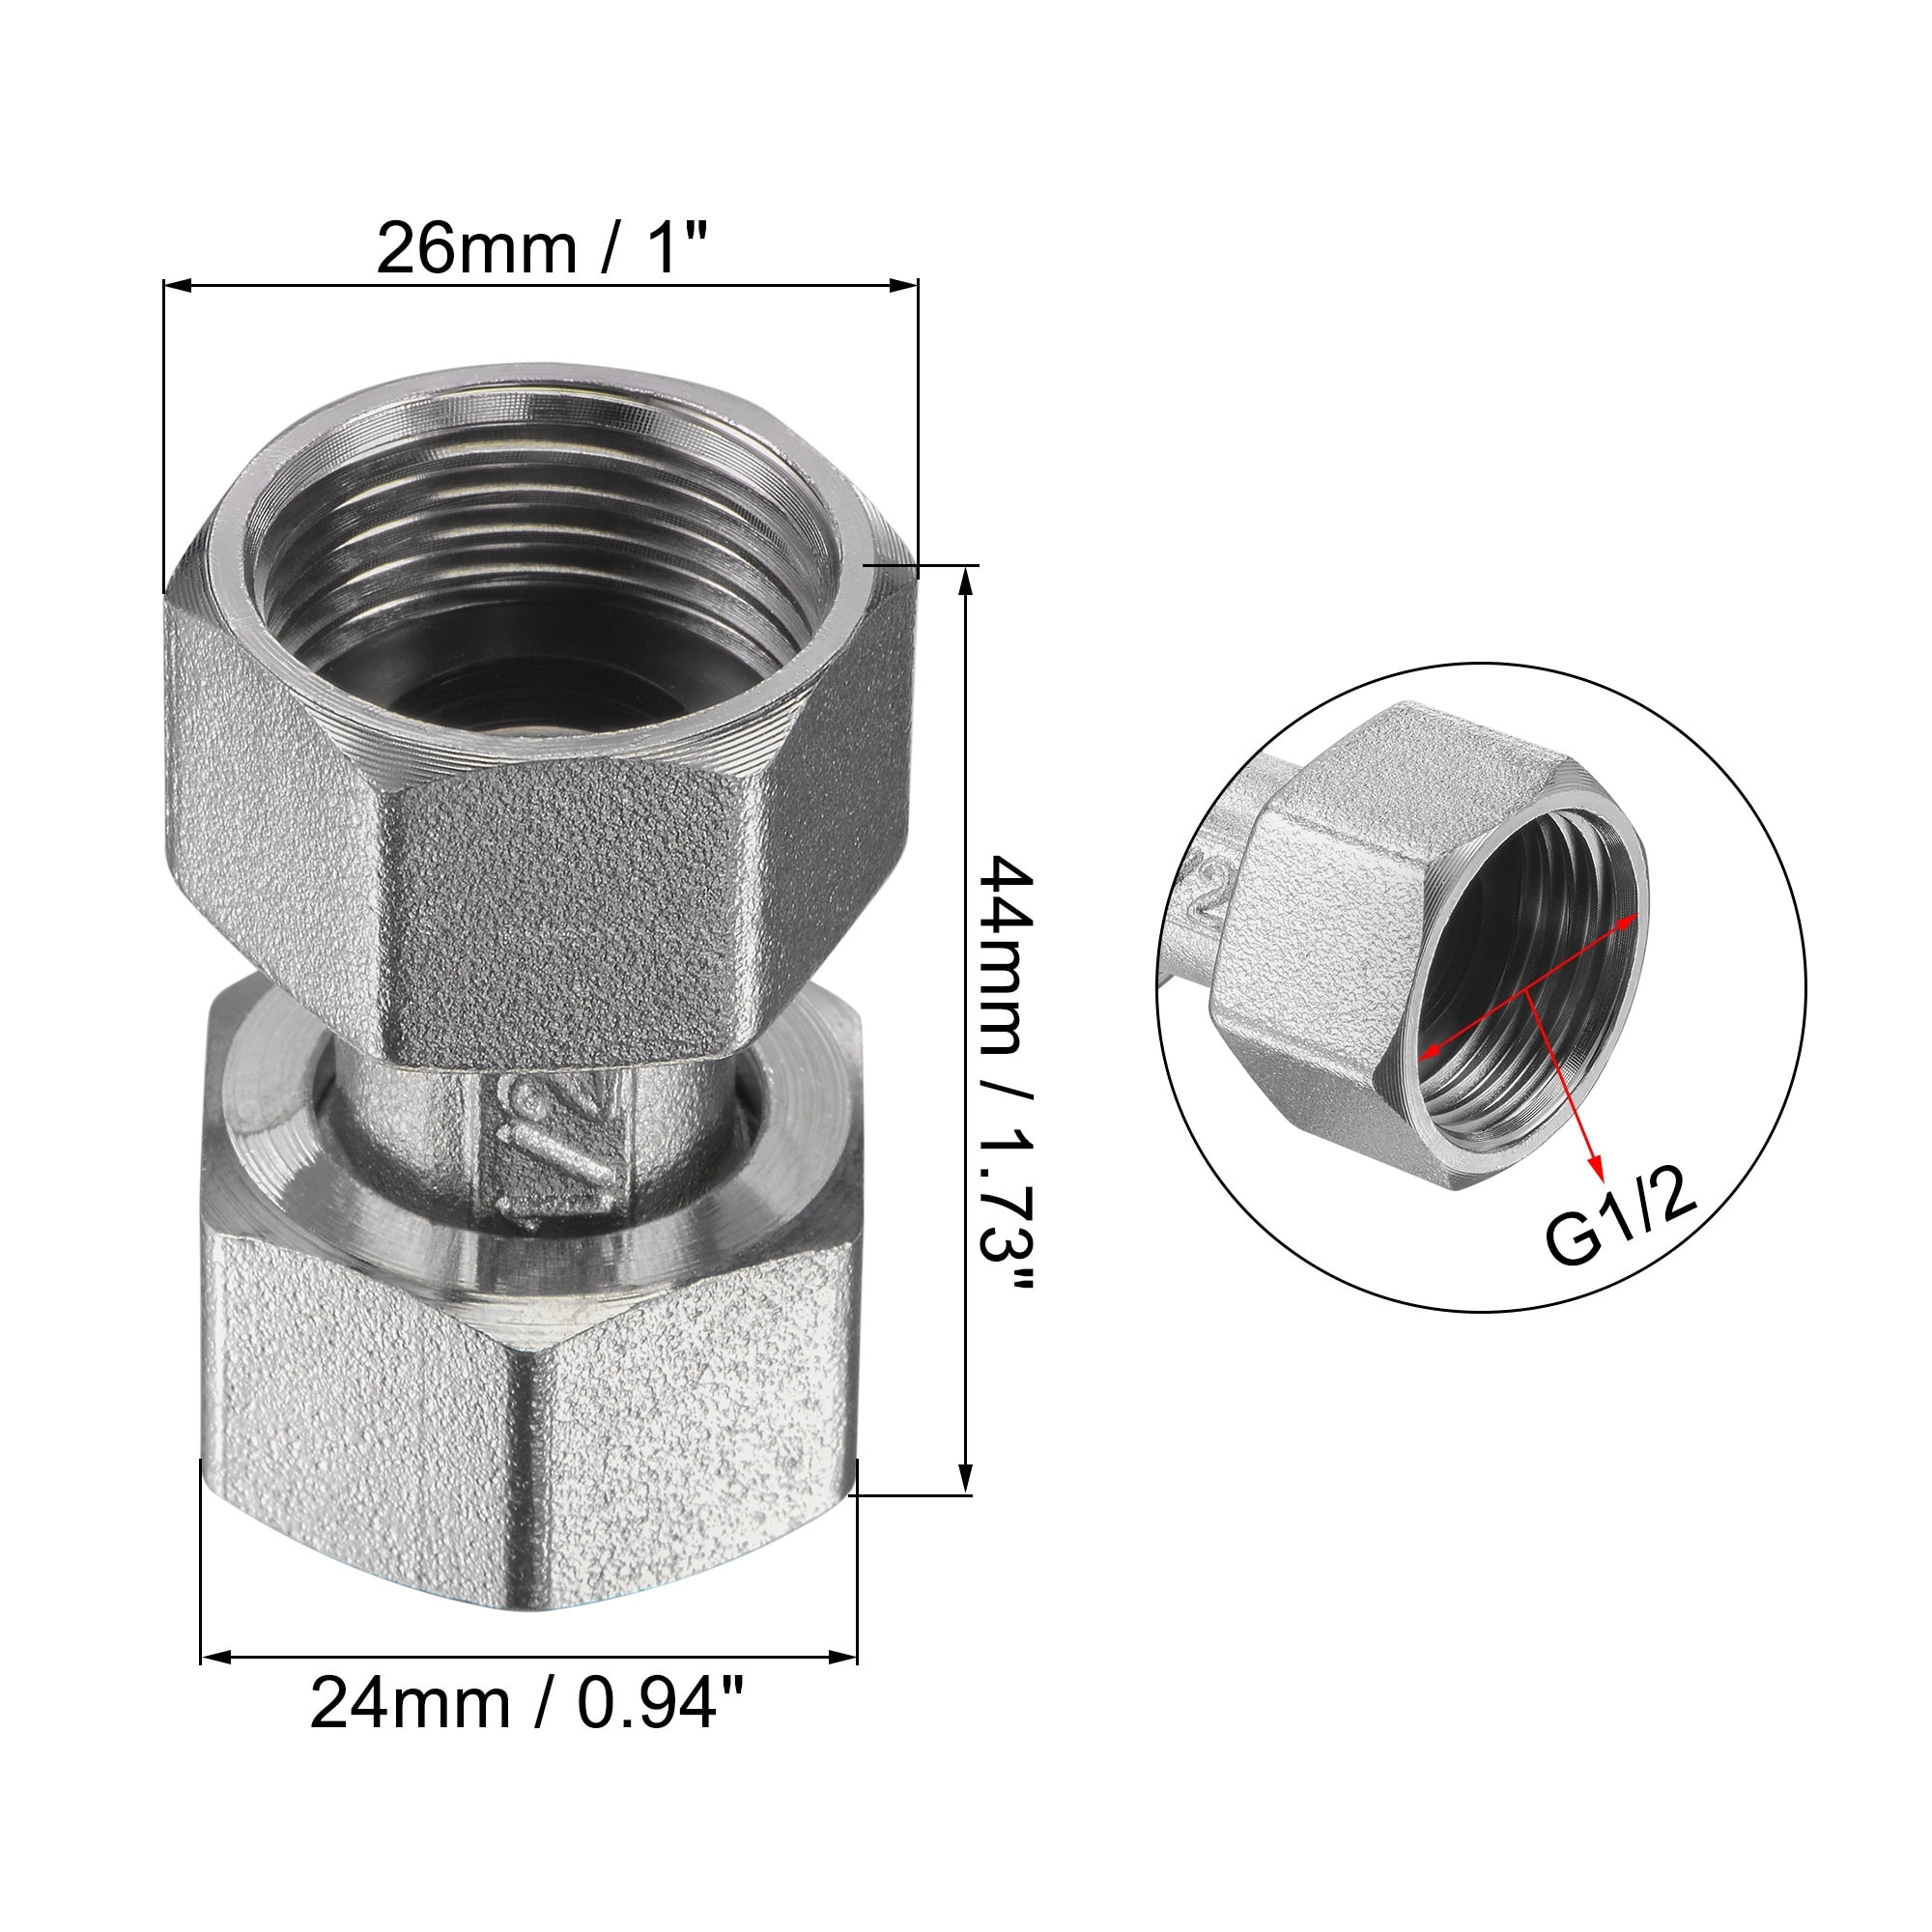 Details about   Pipe Fitting G1/2 Male x G1/2 Female Hex Bushing Adapter 40mm Length 2pcs 